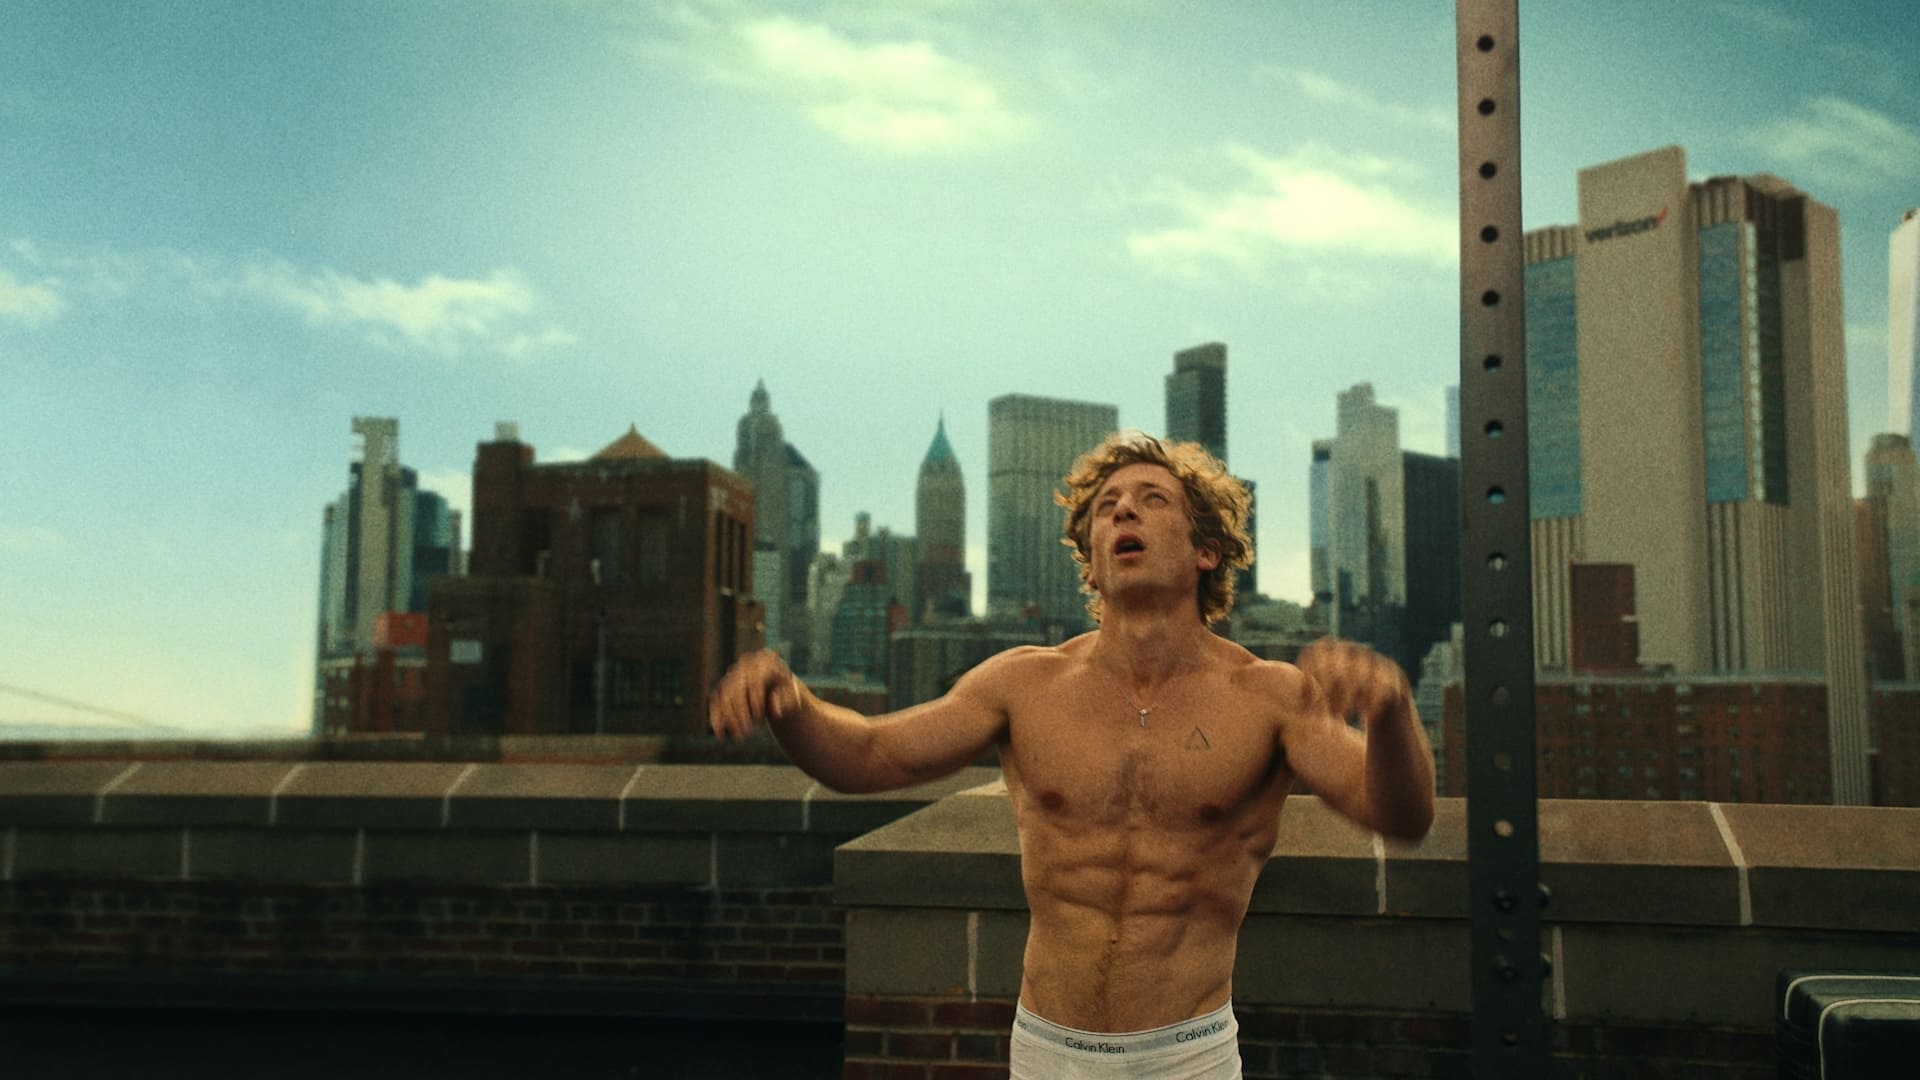 Coffee And Tv Honors The Unheralded Star Behind The Iconic Calvin Klein Ad Featuring Jeremy Allen